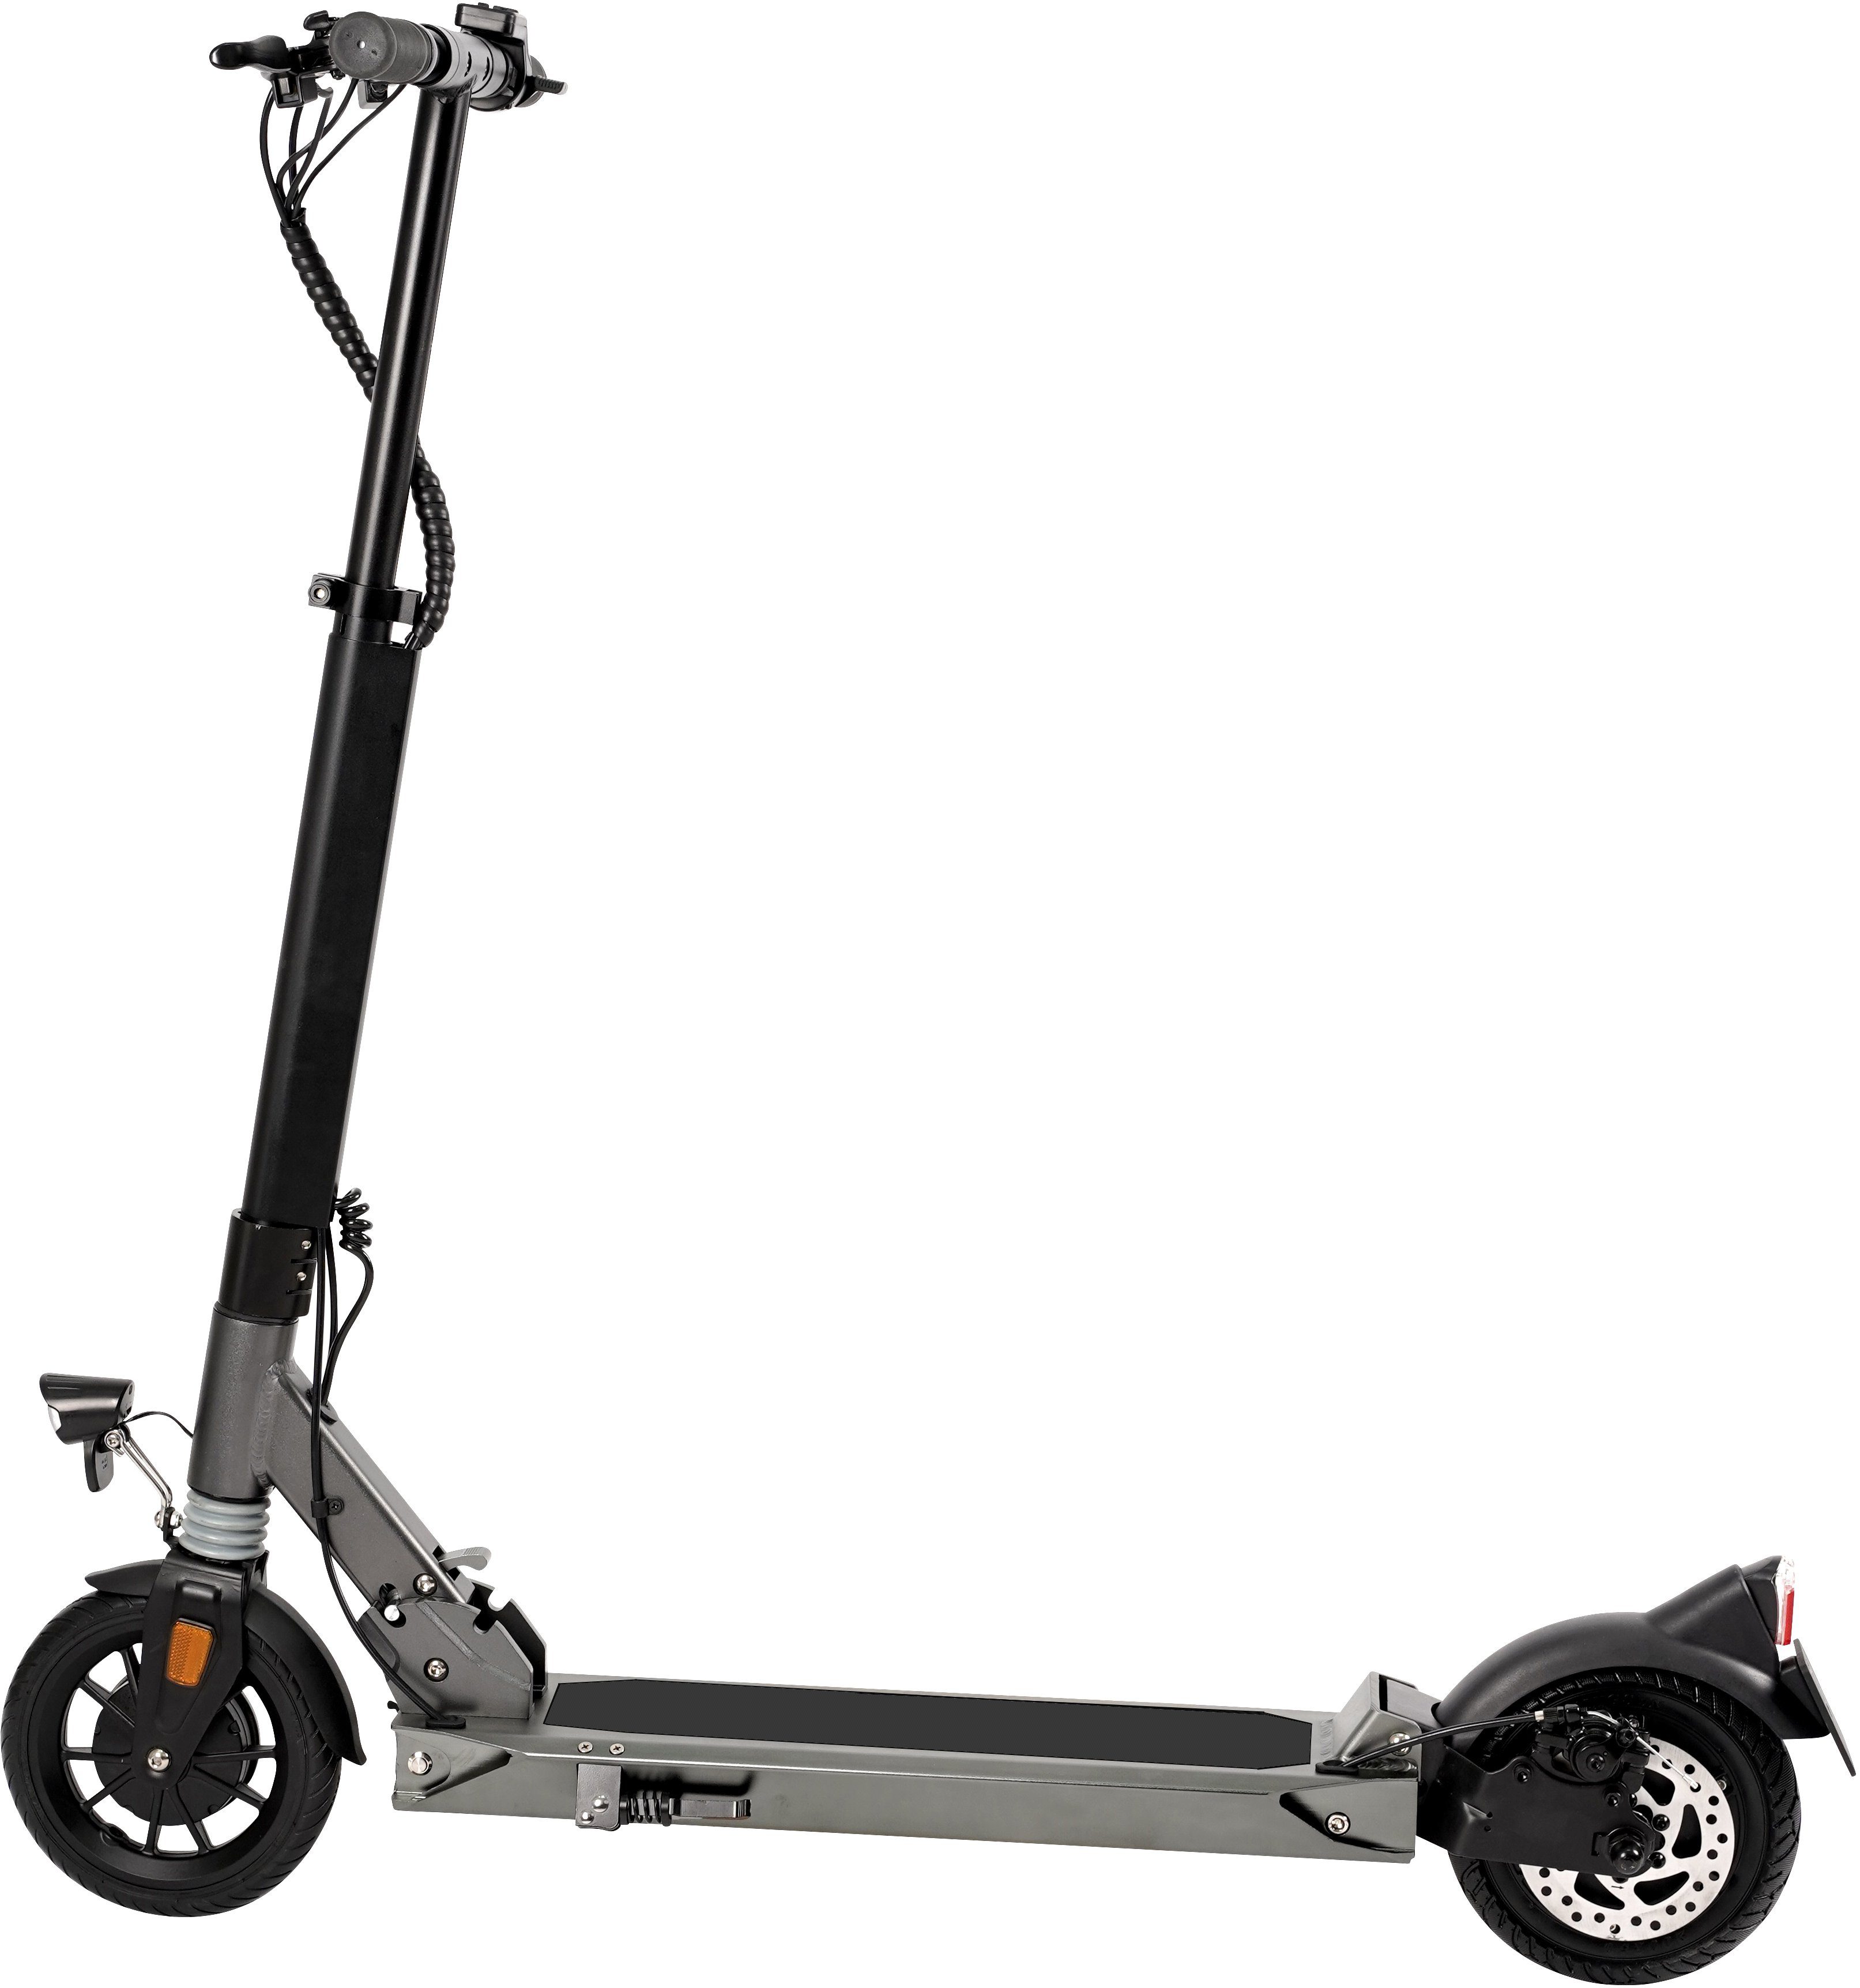 L.A. Sports E-Scooter km/h Deluxe 20 7.8-350 Speed ABE